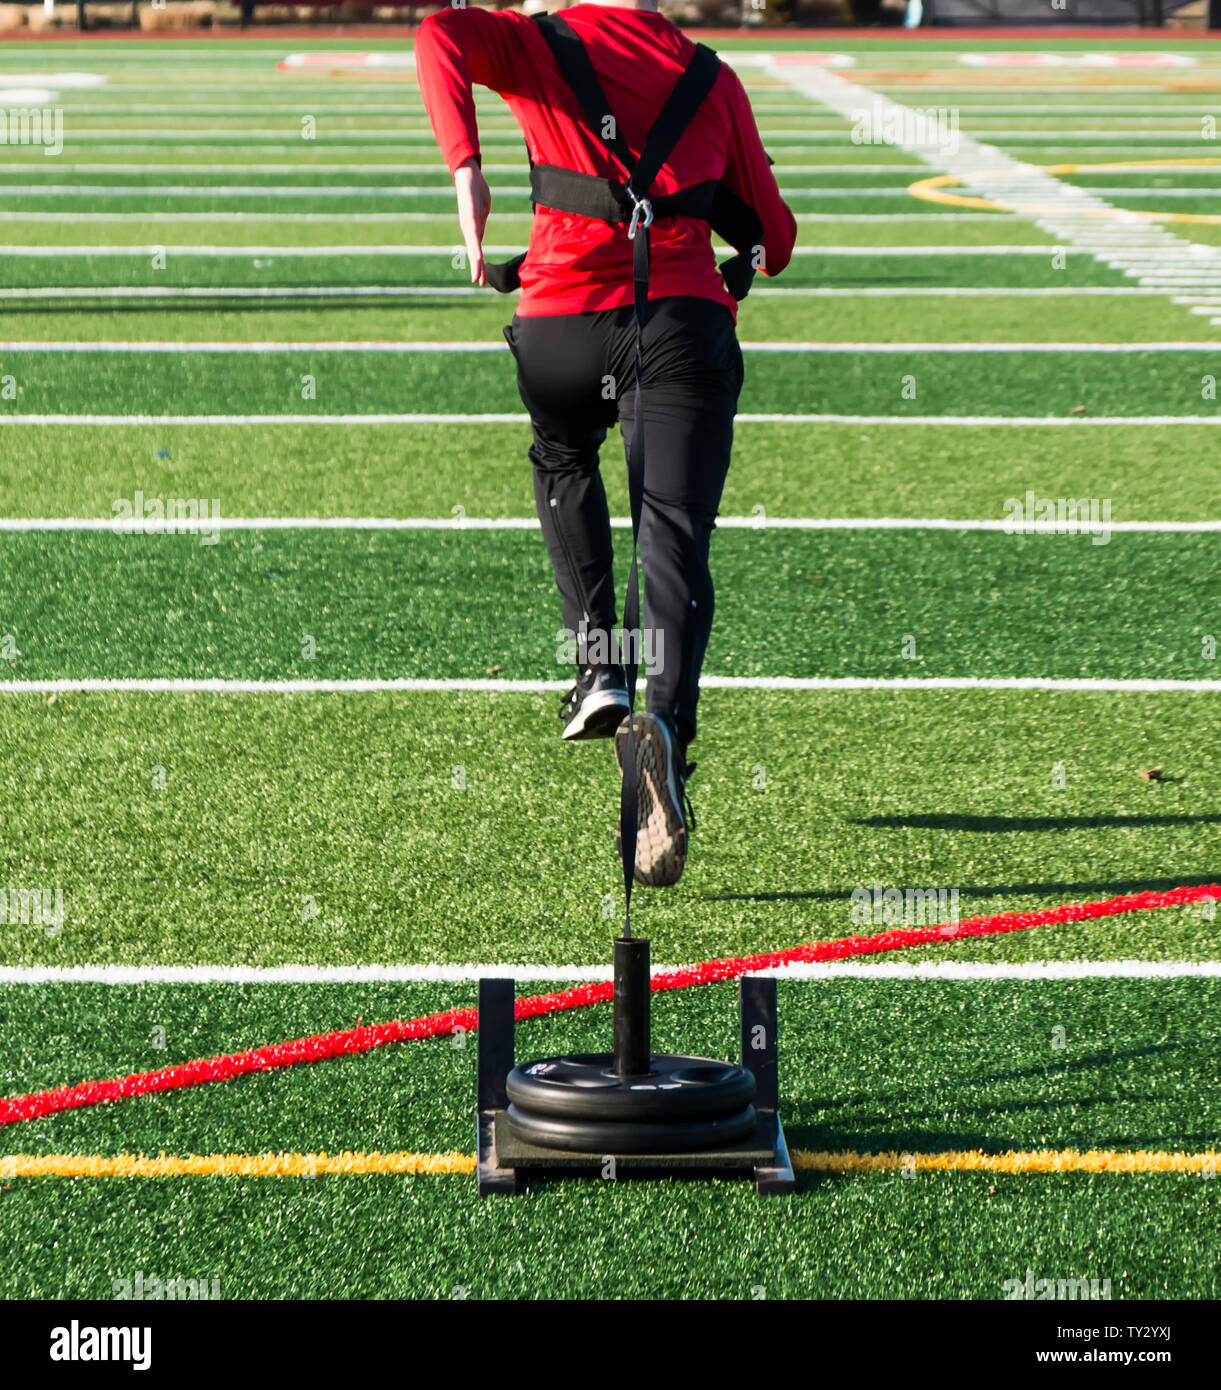 A track and field runner is pulling a weighted sled across a green turf field for speed and strength training. Stock Photo